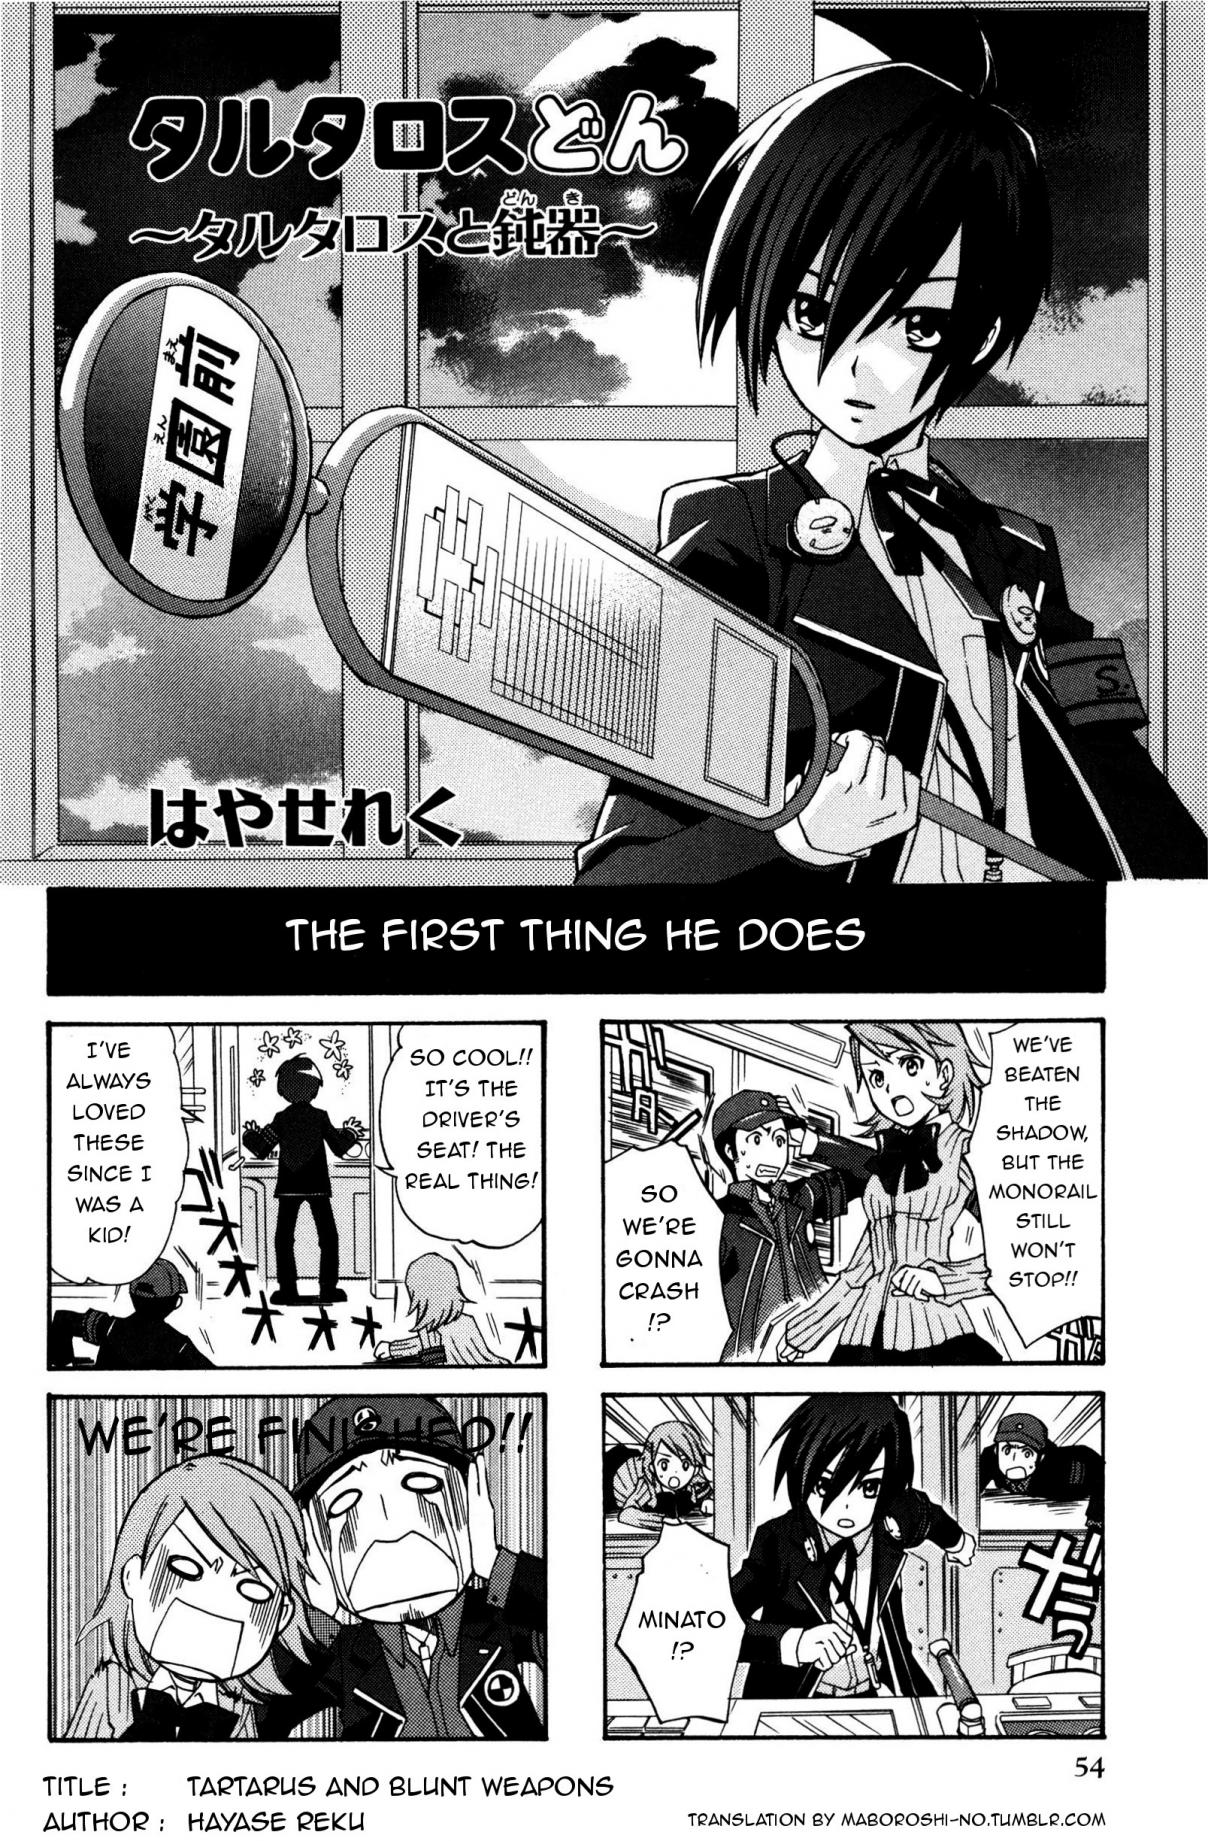 Persona 3 4Koma Kings Vol. 1 Ch. 9 Tartarus and blunt weapons